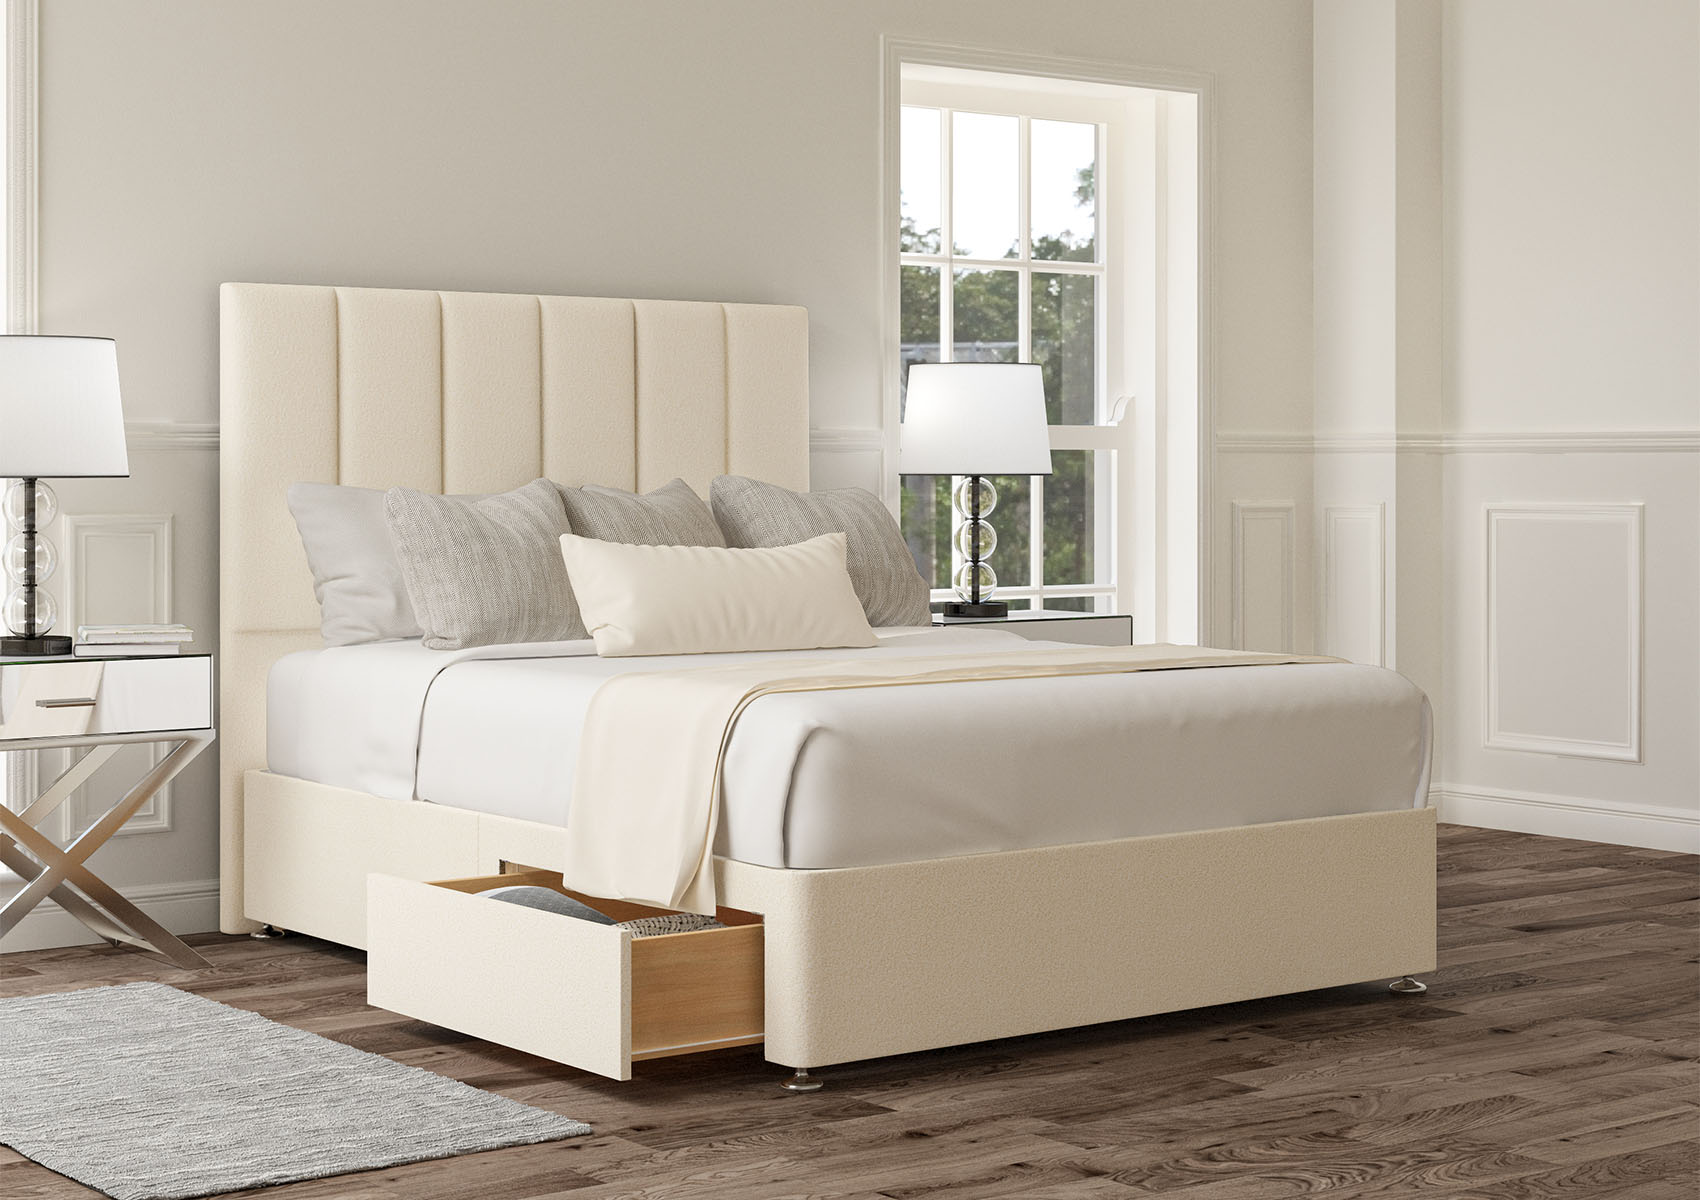 View Empire Teddy Cream Upholstered Super King Divan Bed Time4Sleep information